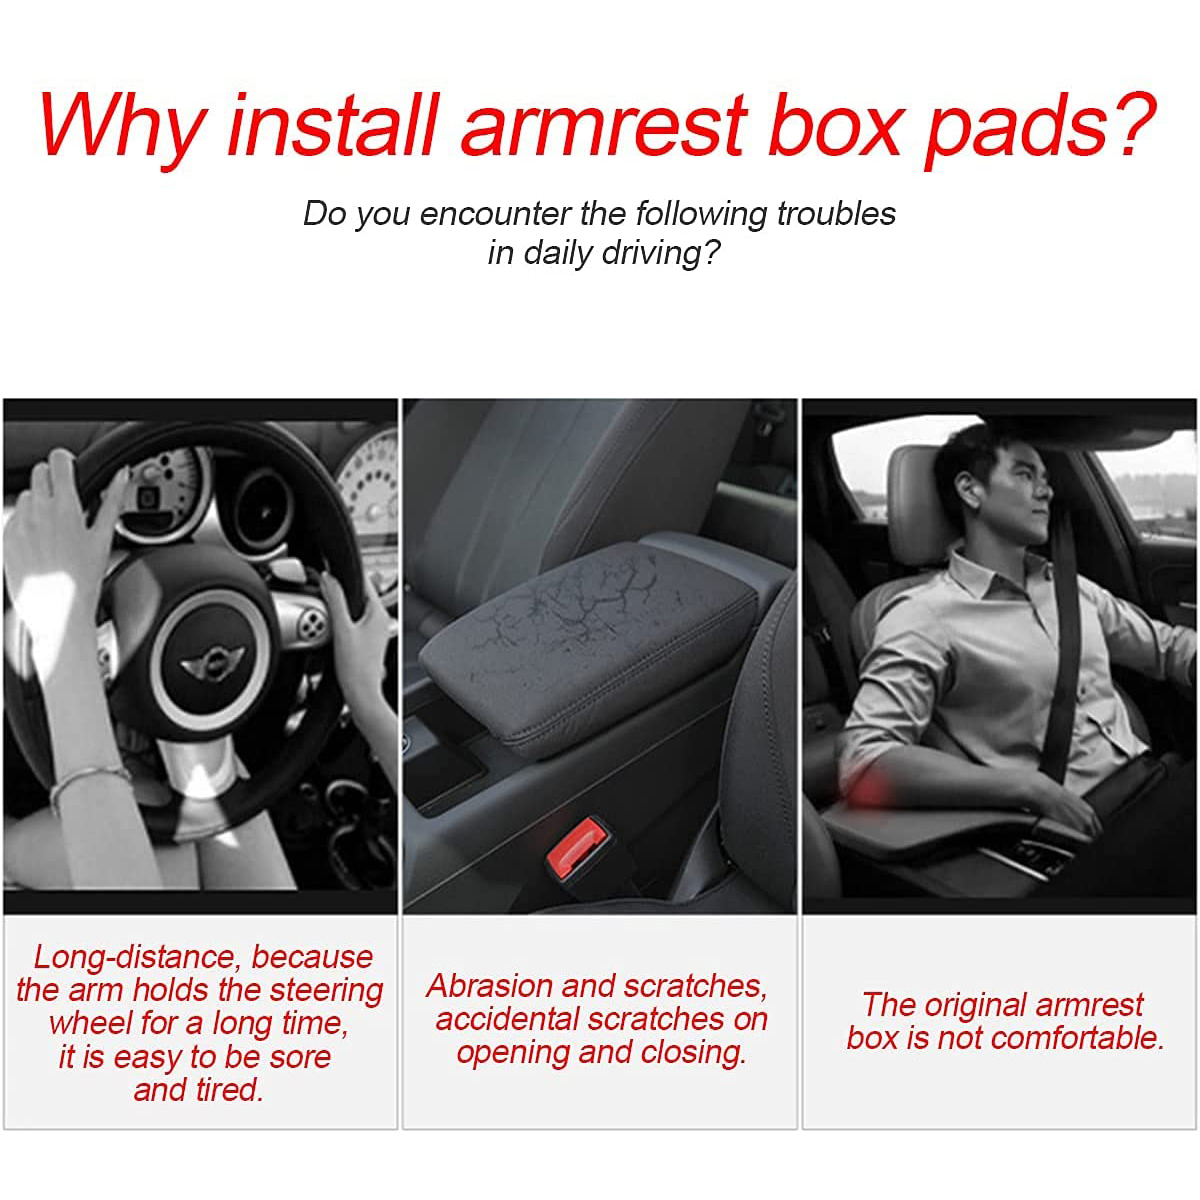 Car Armrest Cover - Universal Waterproof Car Center Console Cover, Car Armrest Seat Box Cover Protector (11.8 x 7.87 Inch) - image 3 of 8